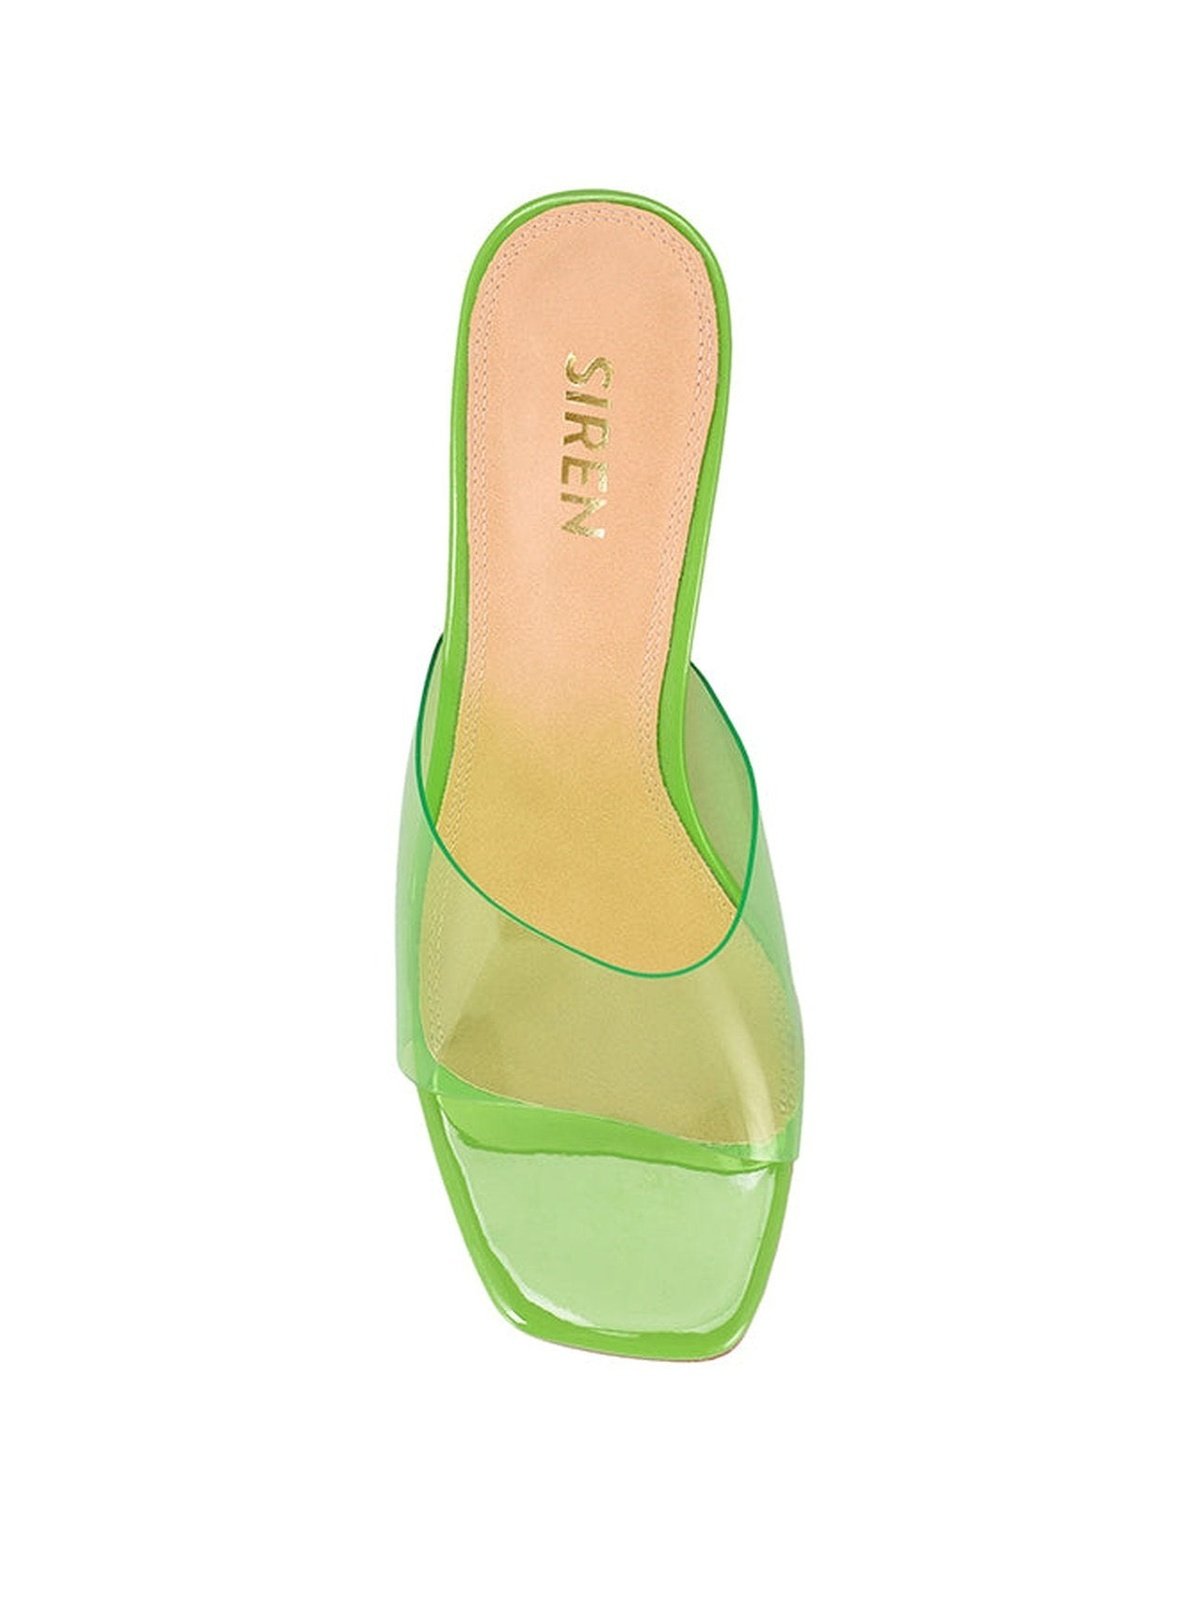 Spoon-heeled satin sandals - Lime green - Ladies | H&M IN